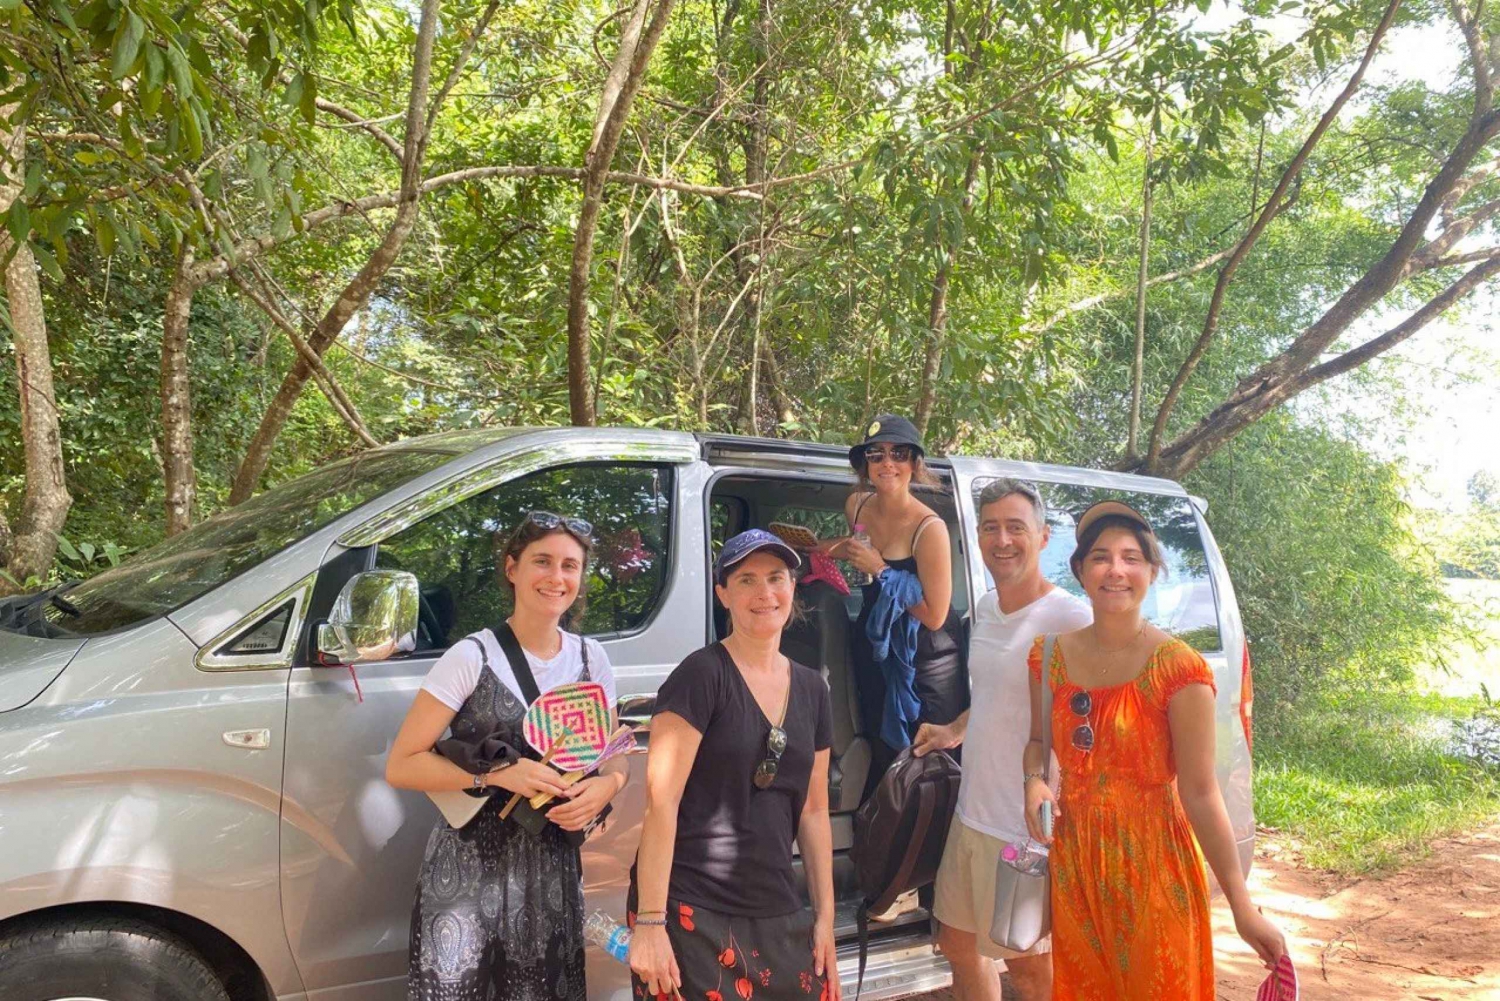 Private Taxi transfer from Siem Reap to Bangkok